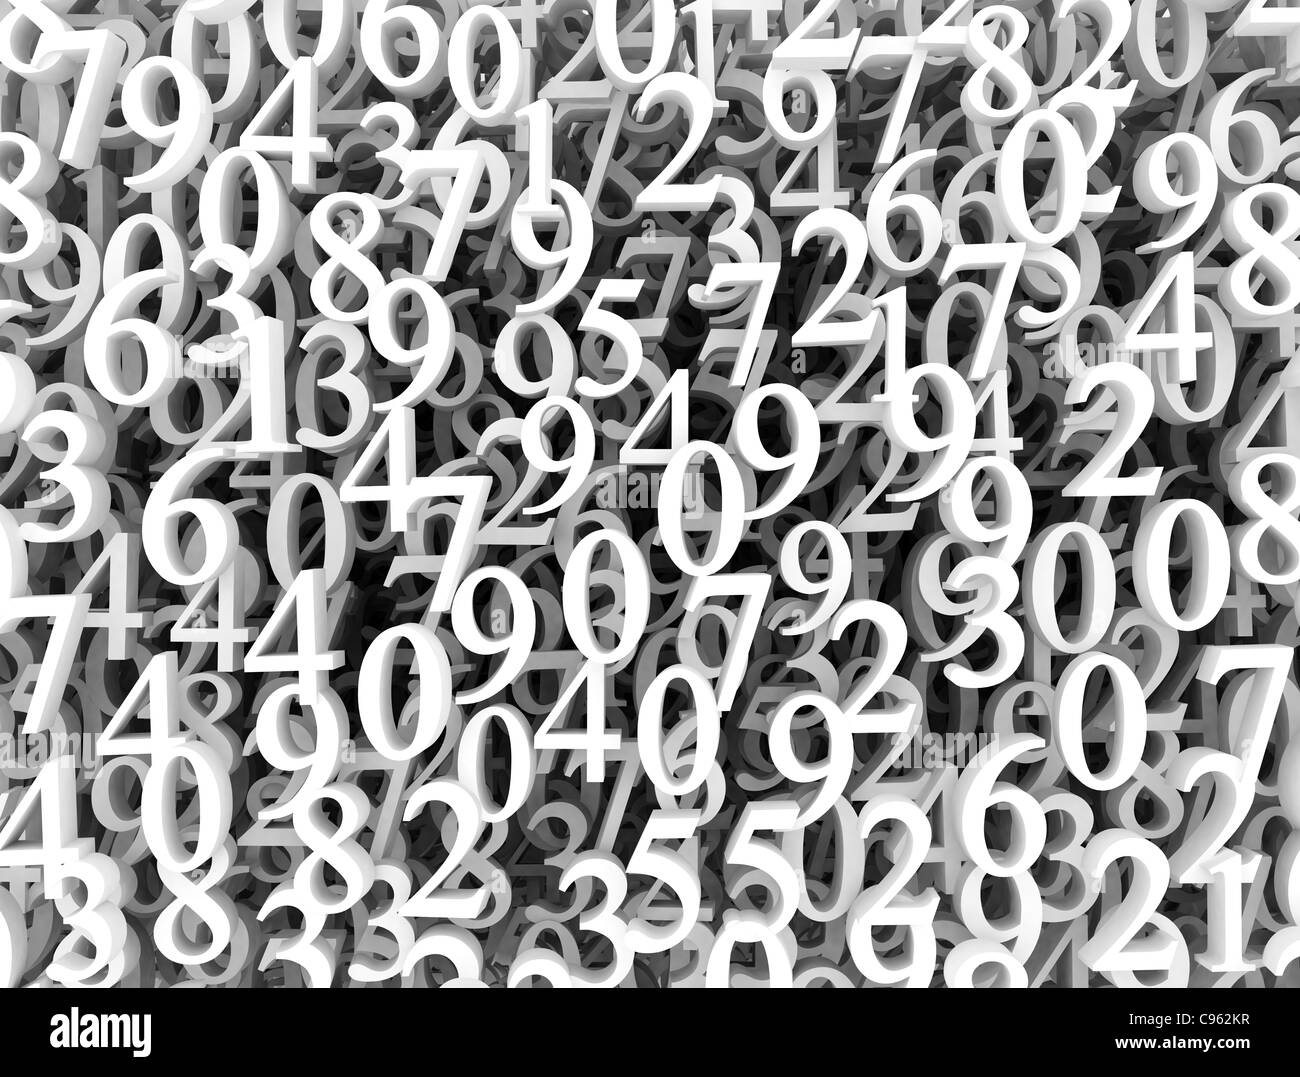 Numbers background Stock Photo